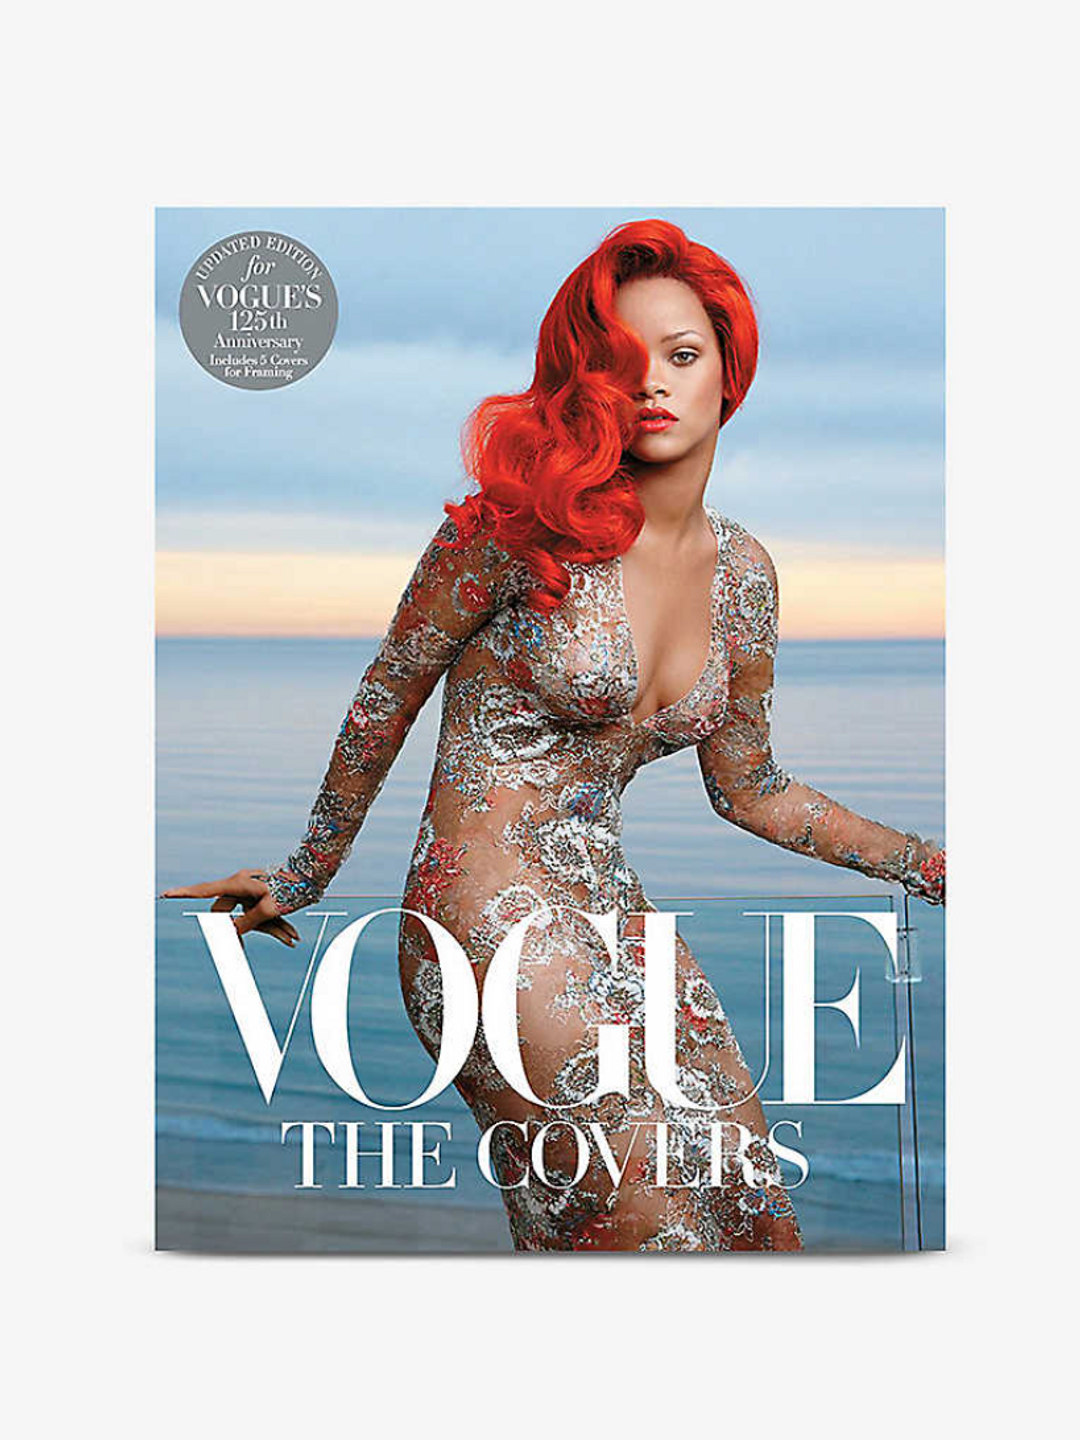 Vogue: The Covers fashion book